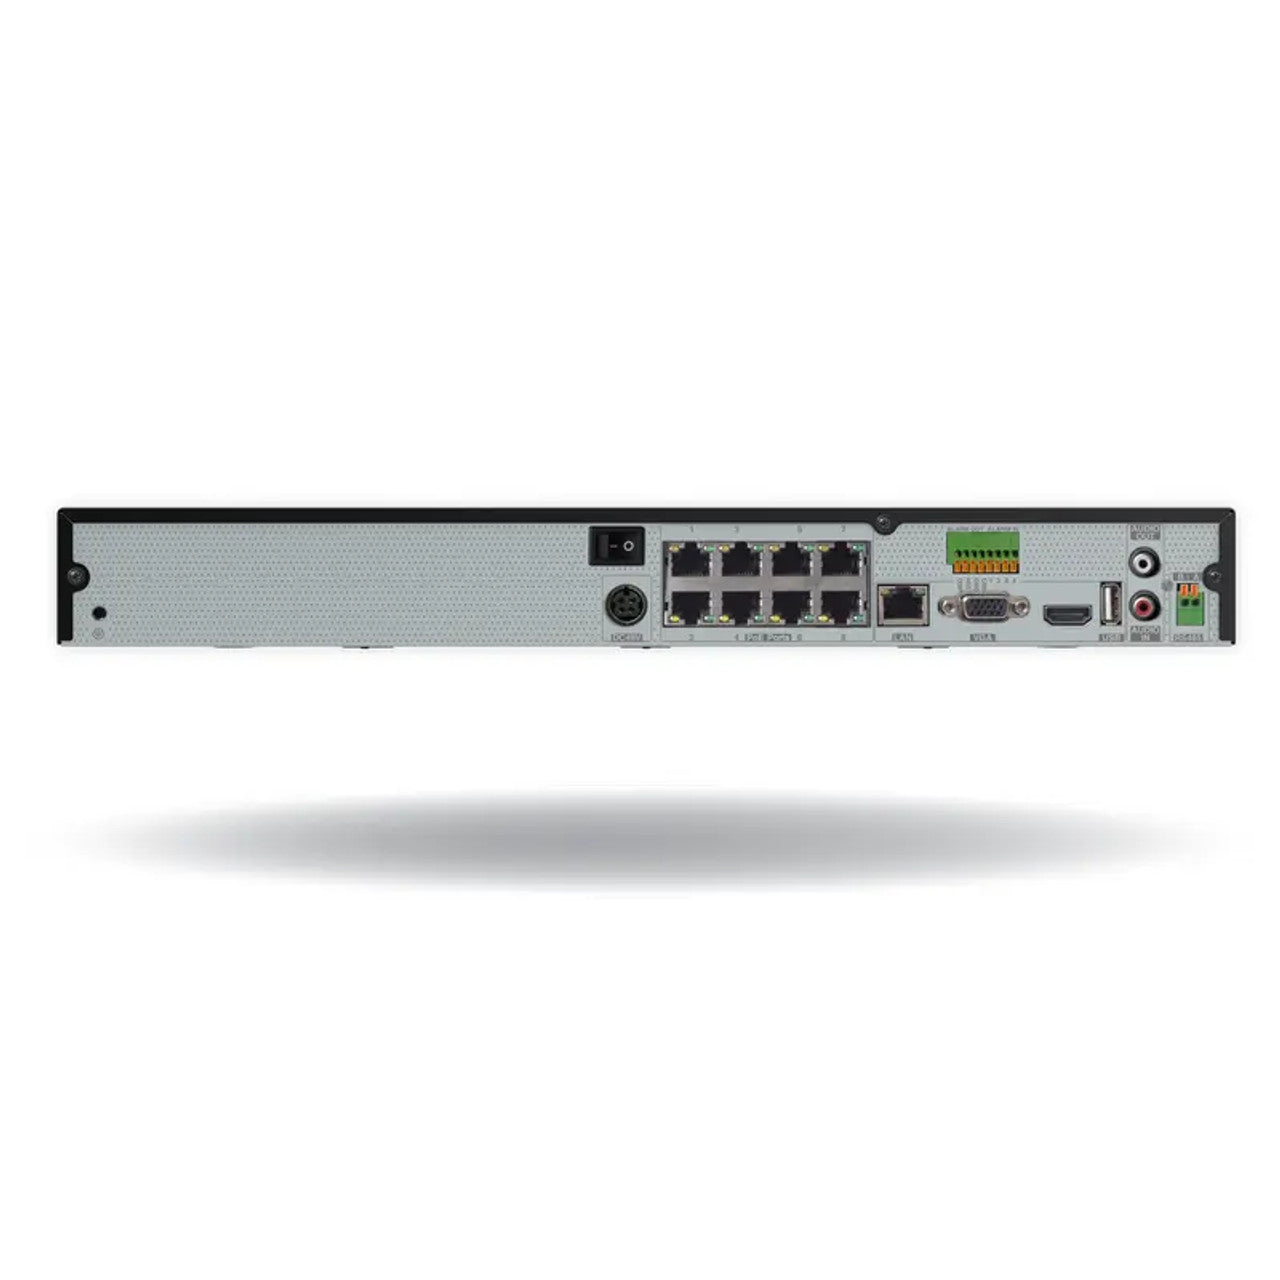 Digital Watchdog DW-VG4122T8P VMAX IP G4 8 Channel PoE NVR with 4 bonus channels with 2TB Hard Drive, 12-Channel